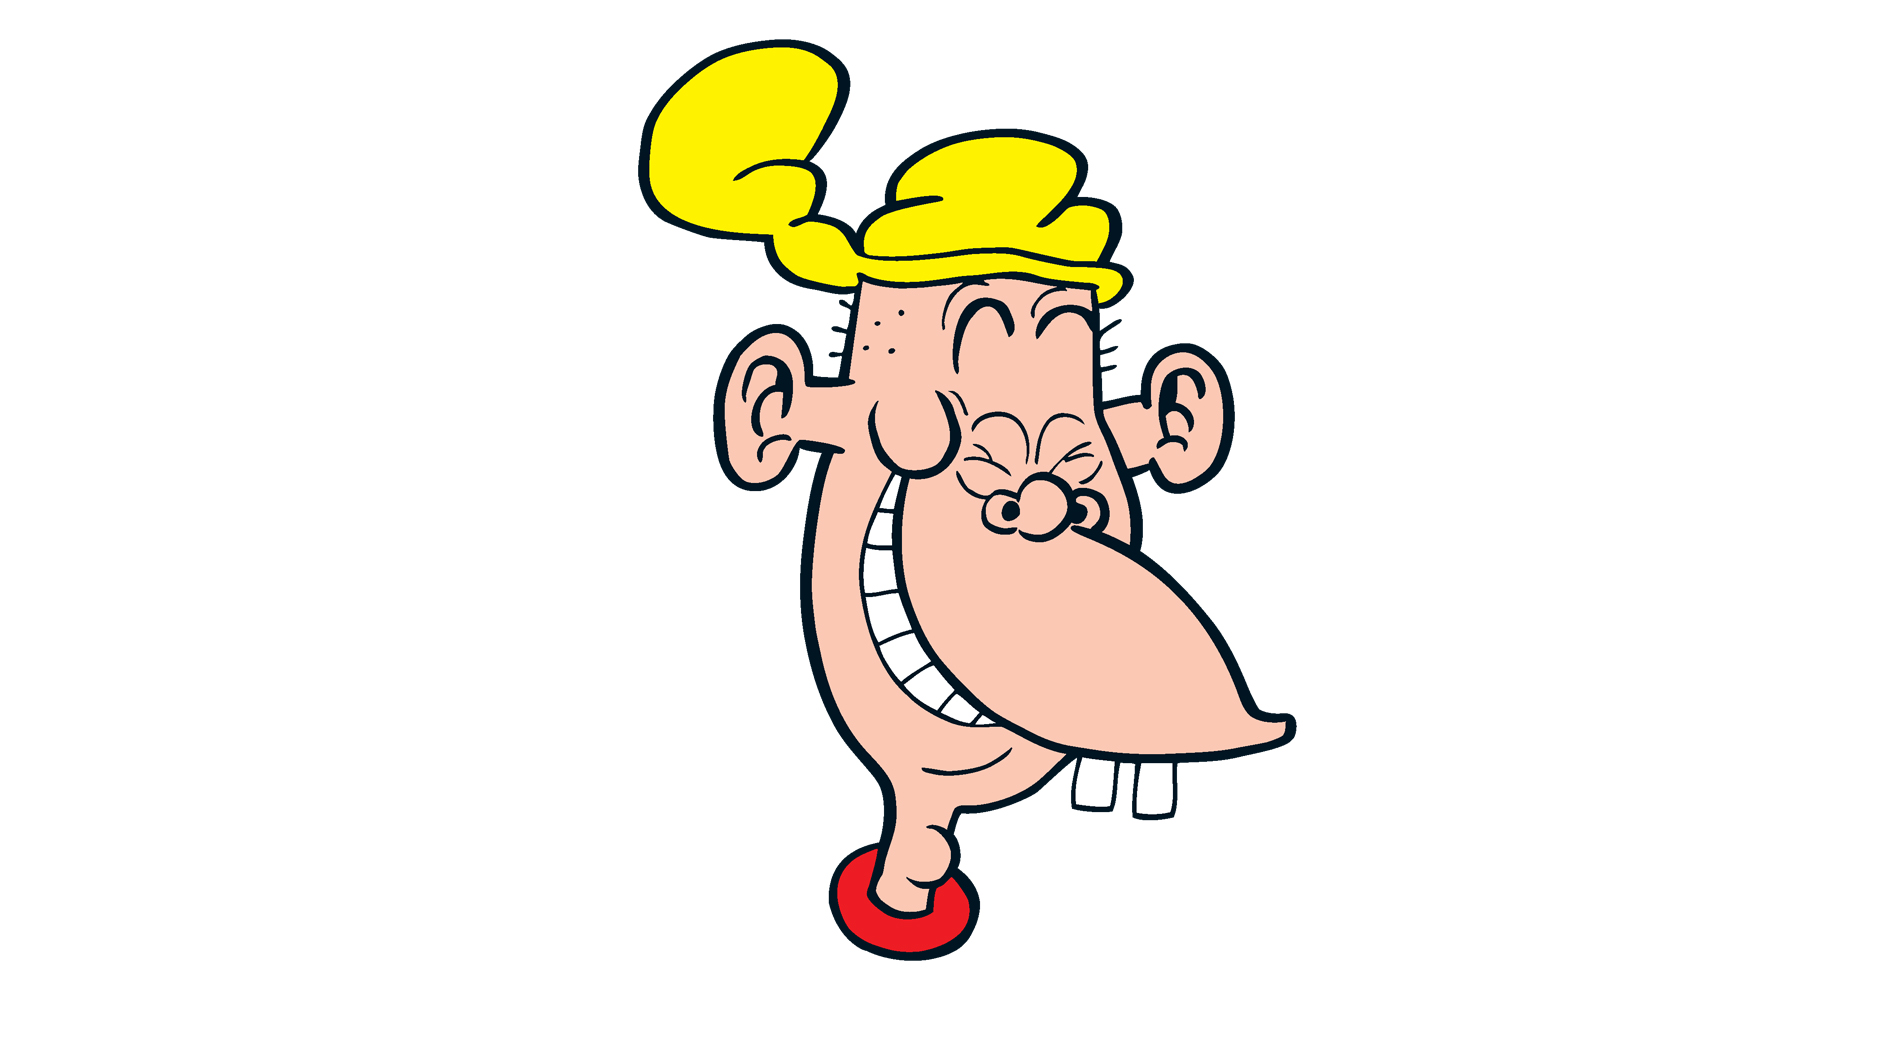 Plug from Beano's The Bash Street Kids knows he's beautiful where it counts... on the outside!